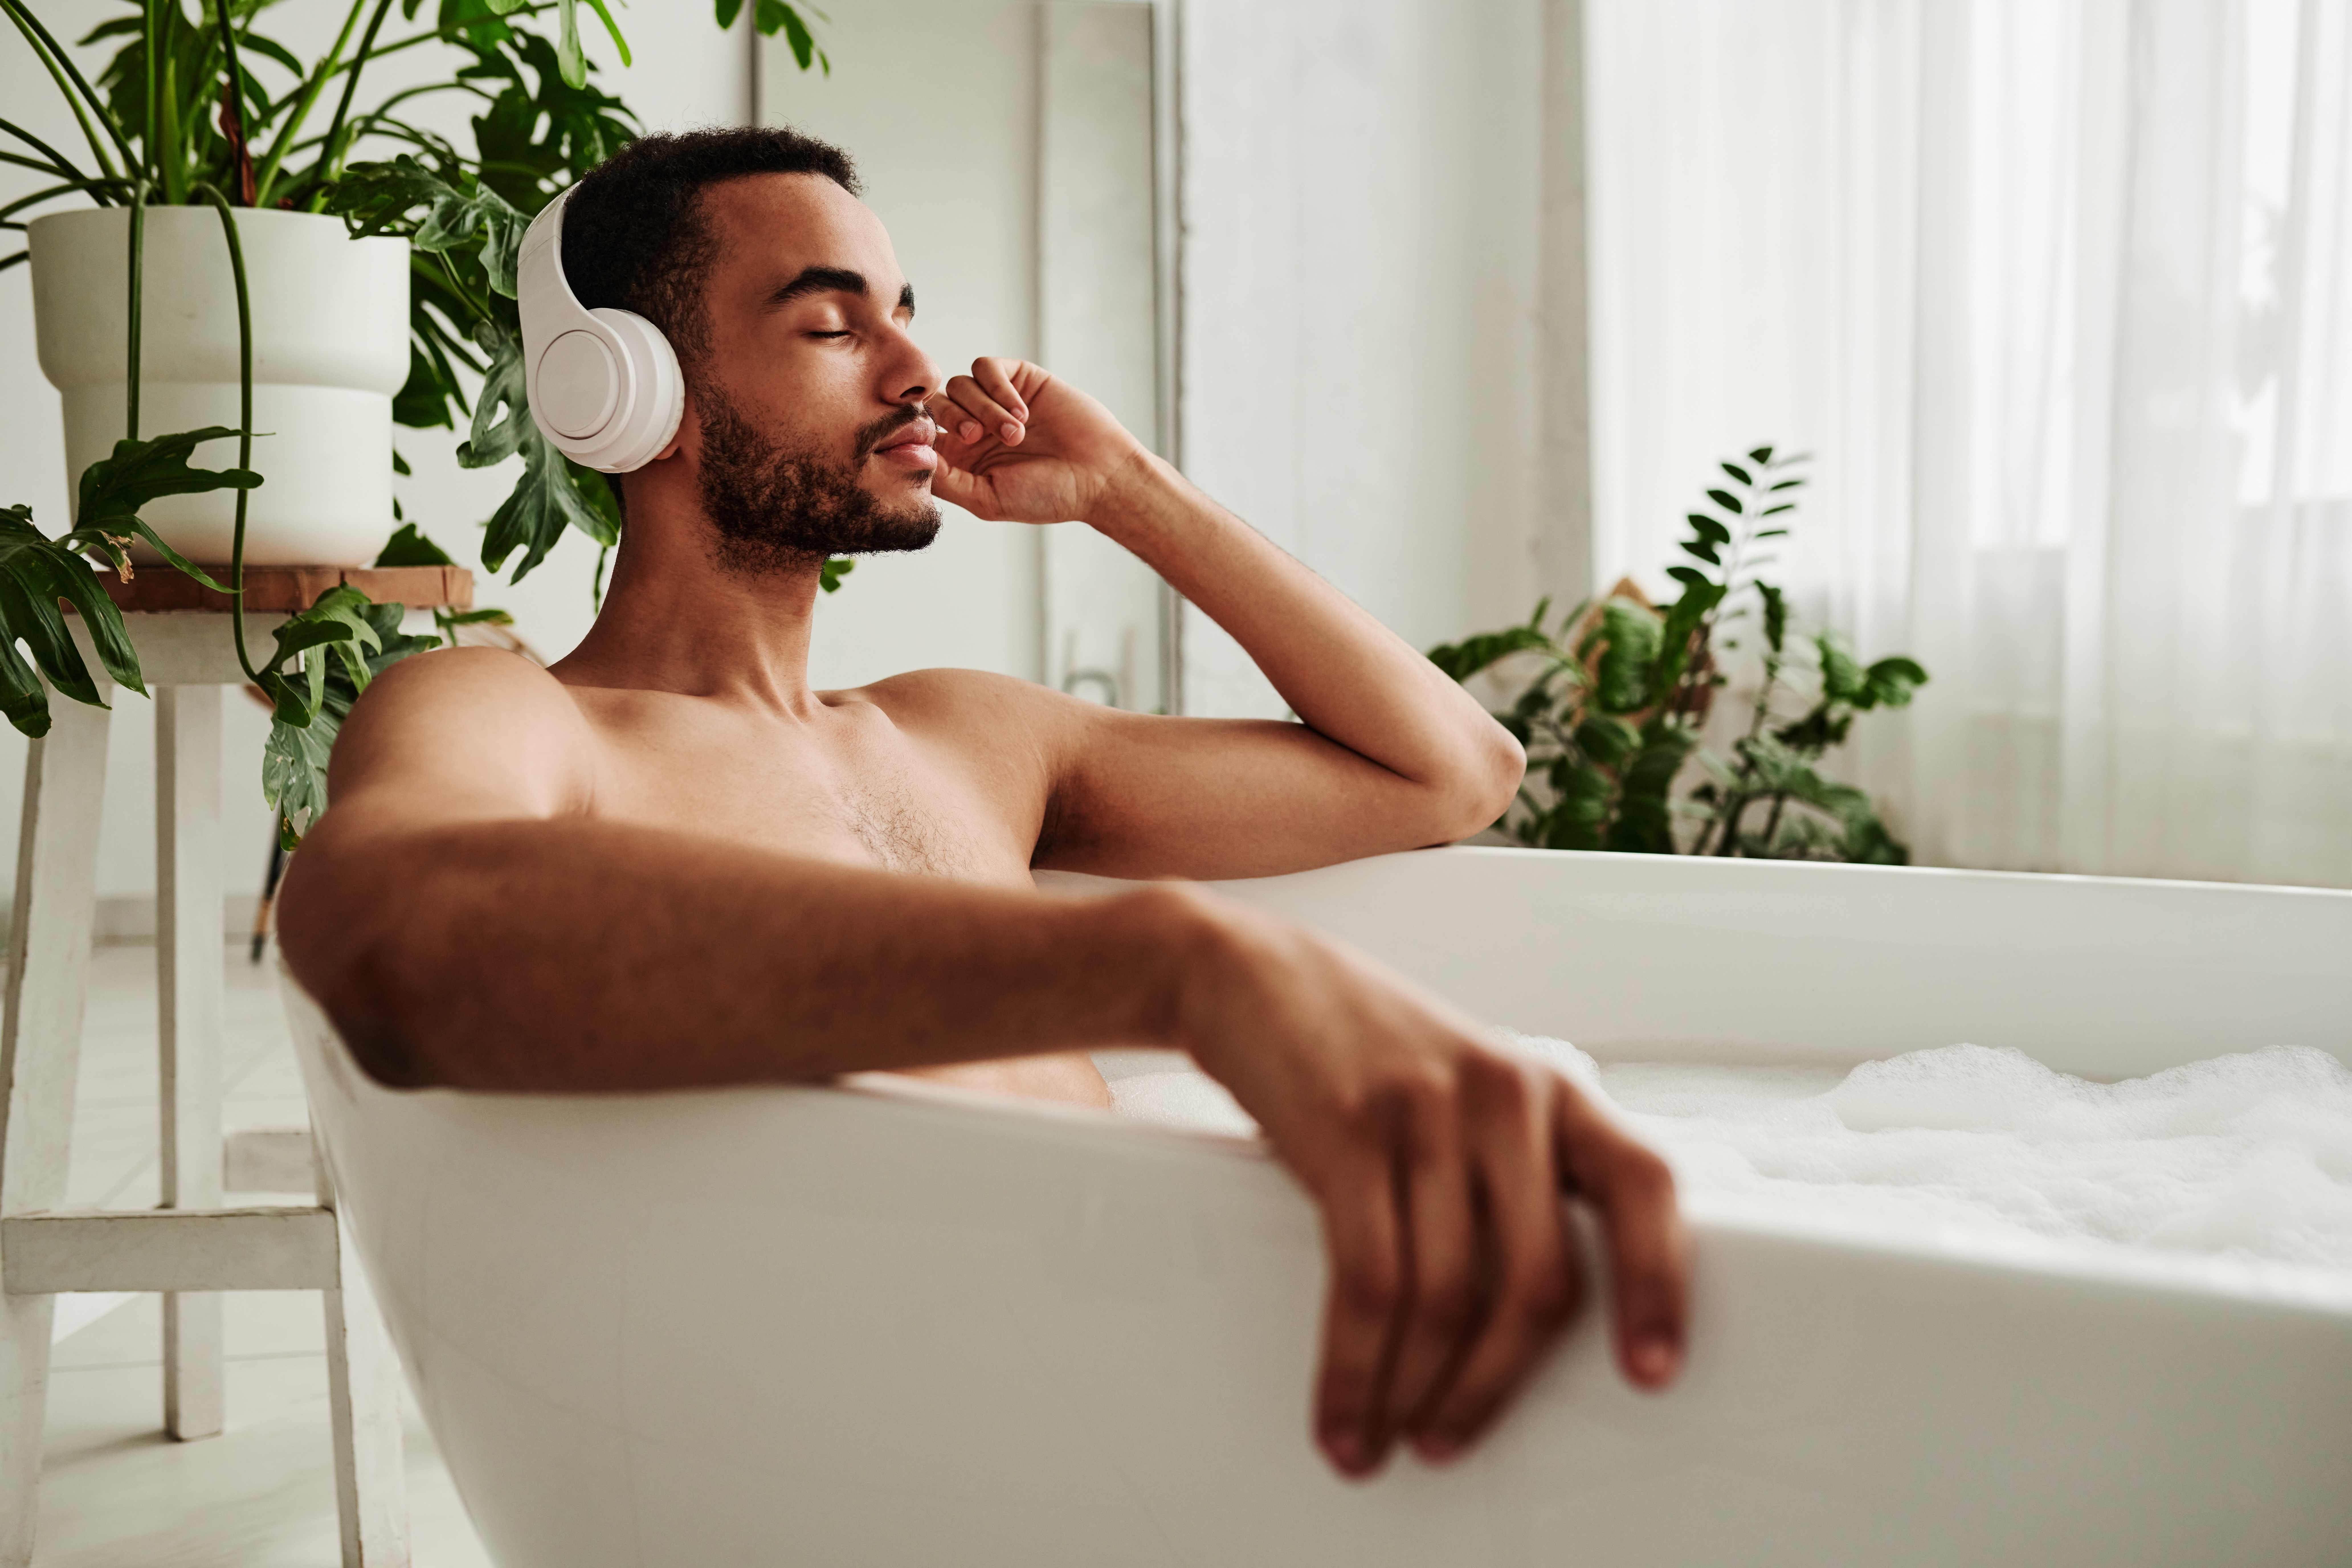 A Taurus man practices self-care by taking a bubble bath and listening to music.